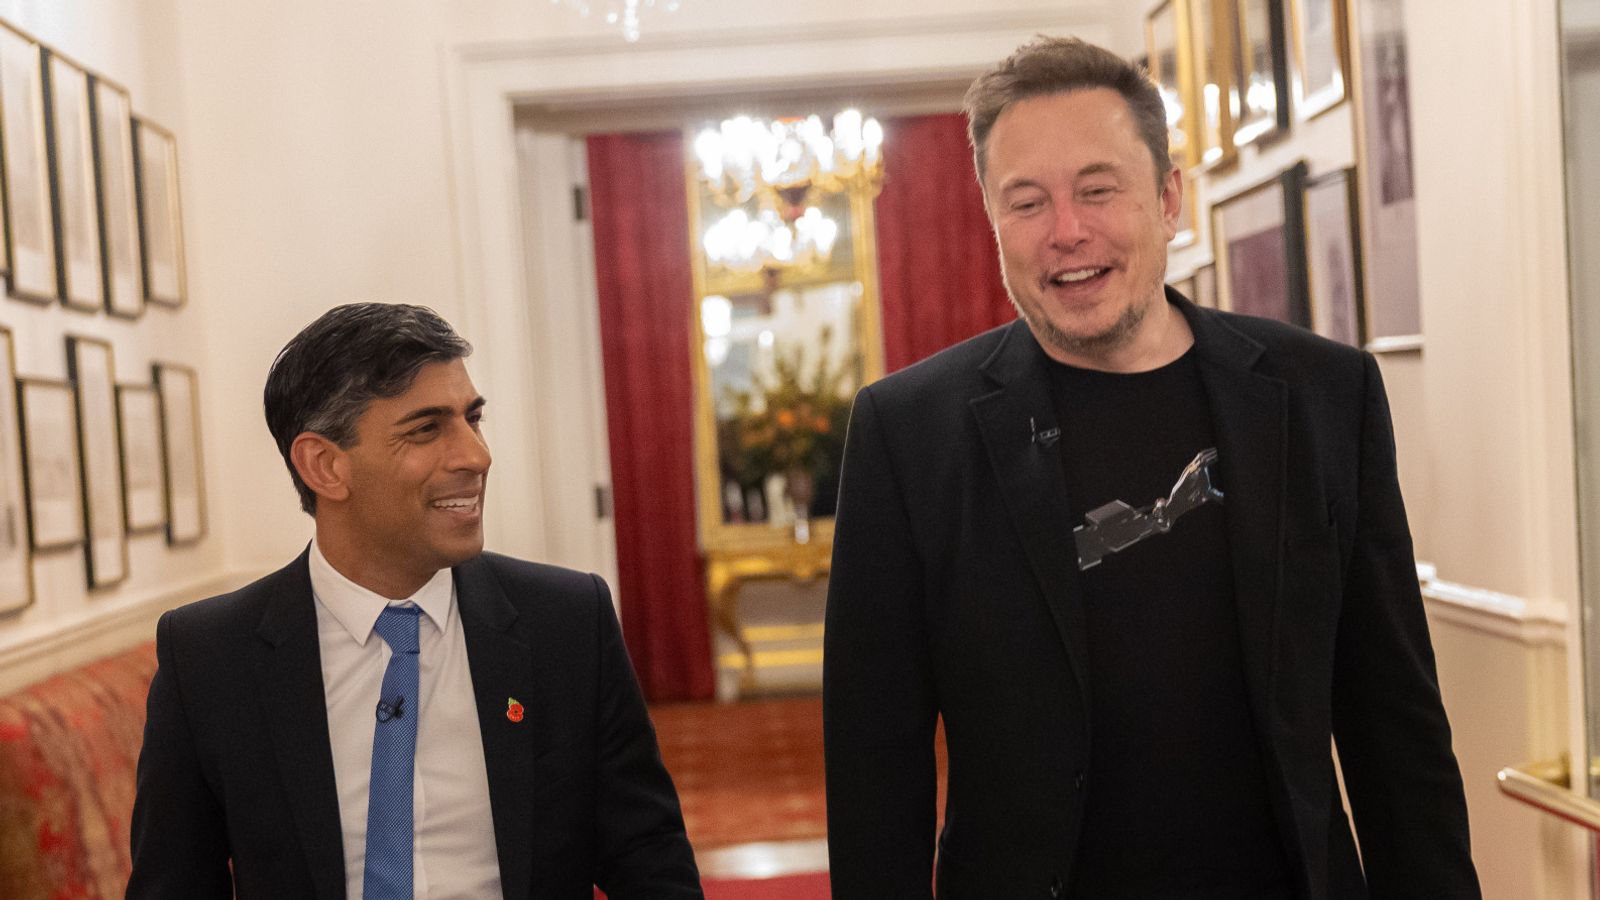 Rishi Sunak suggests more should 'give up security of regular pay cheque' - as Musk warns of humanoid robots that can 'chase you anywhere'